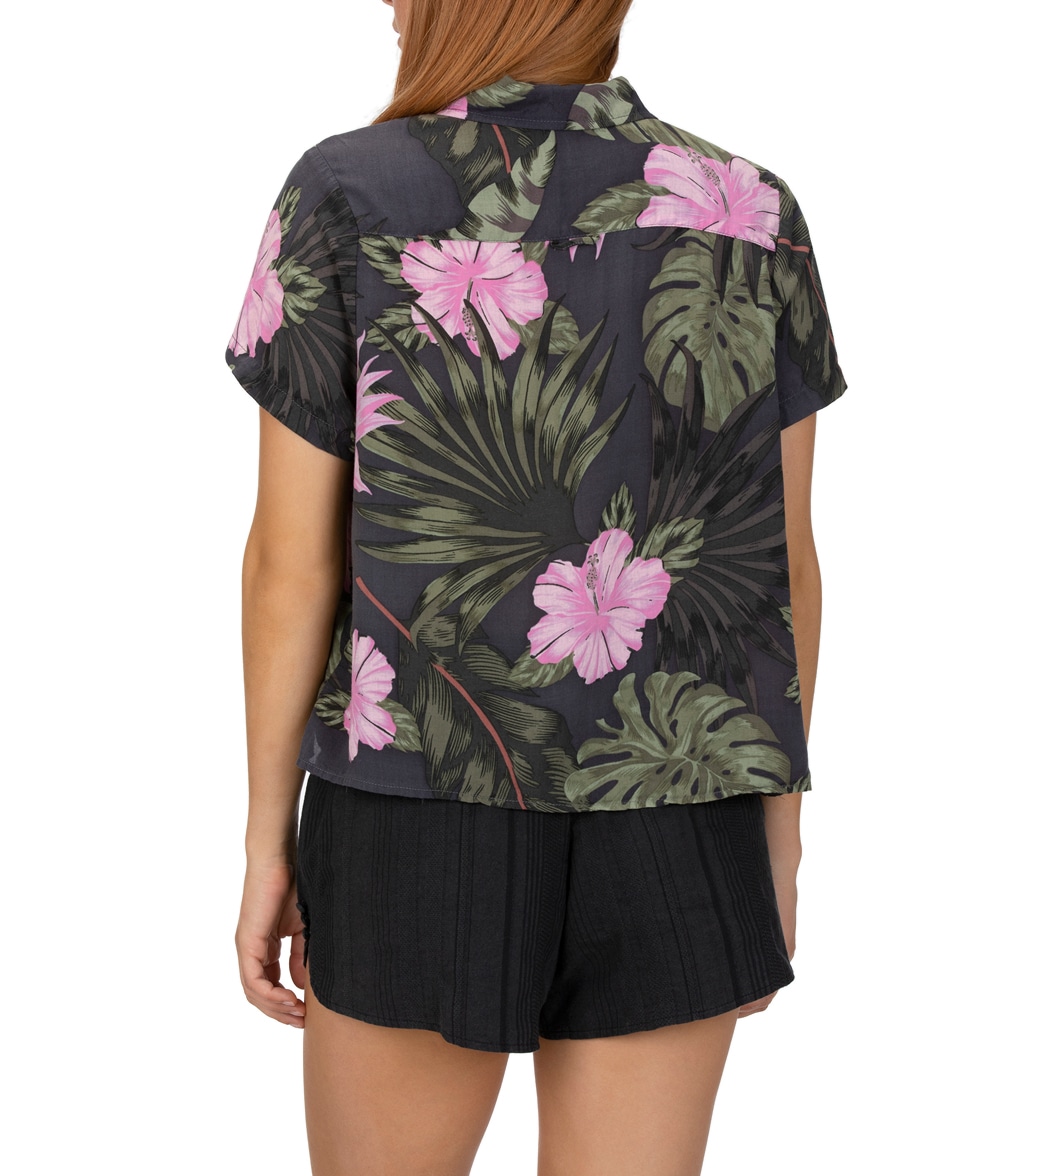 Hurley Getaway Printed Short Sleeve Camp Shirt - Anthracite Small - Swimoutlet.com